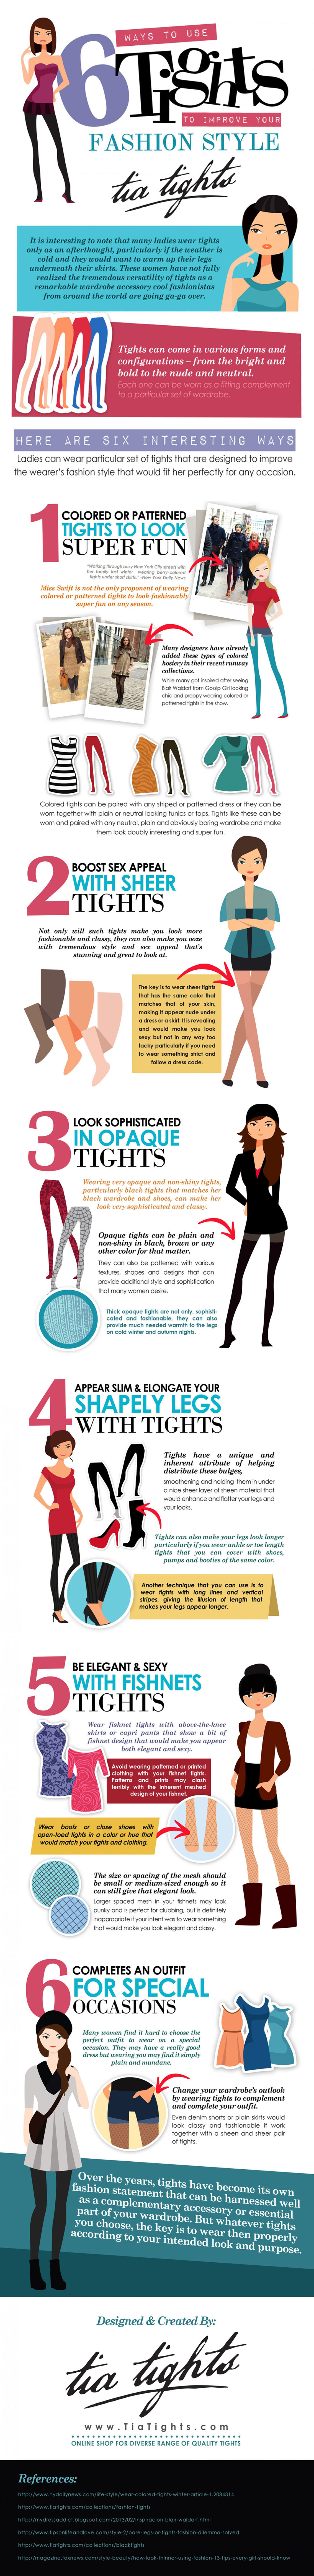 Ways to Use Tights to Improve your Fashion Style Infographic